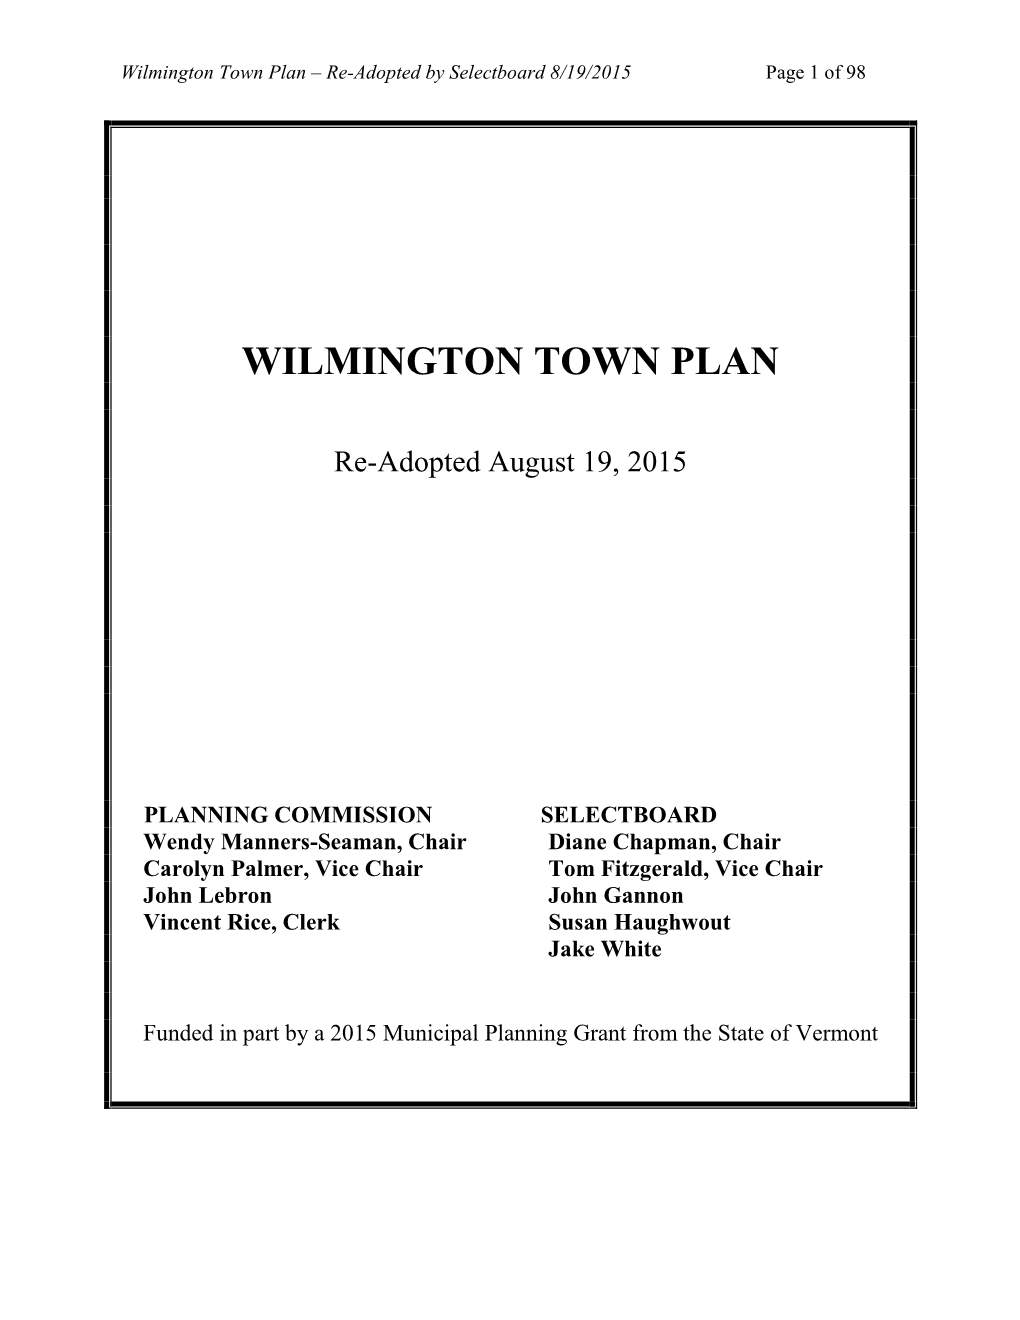 Wilmington Town Plan Adopted 8-19-2015